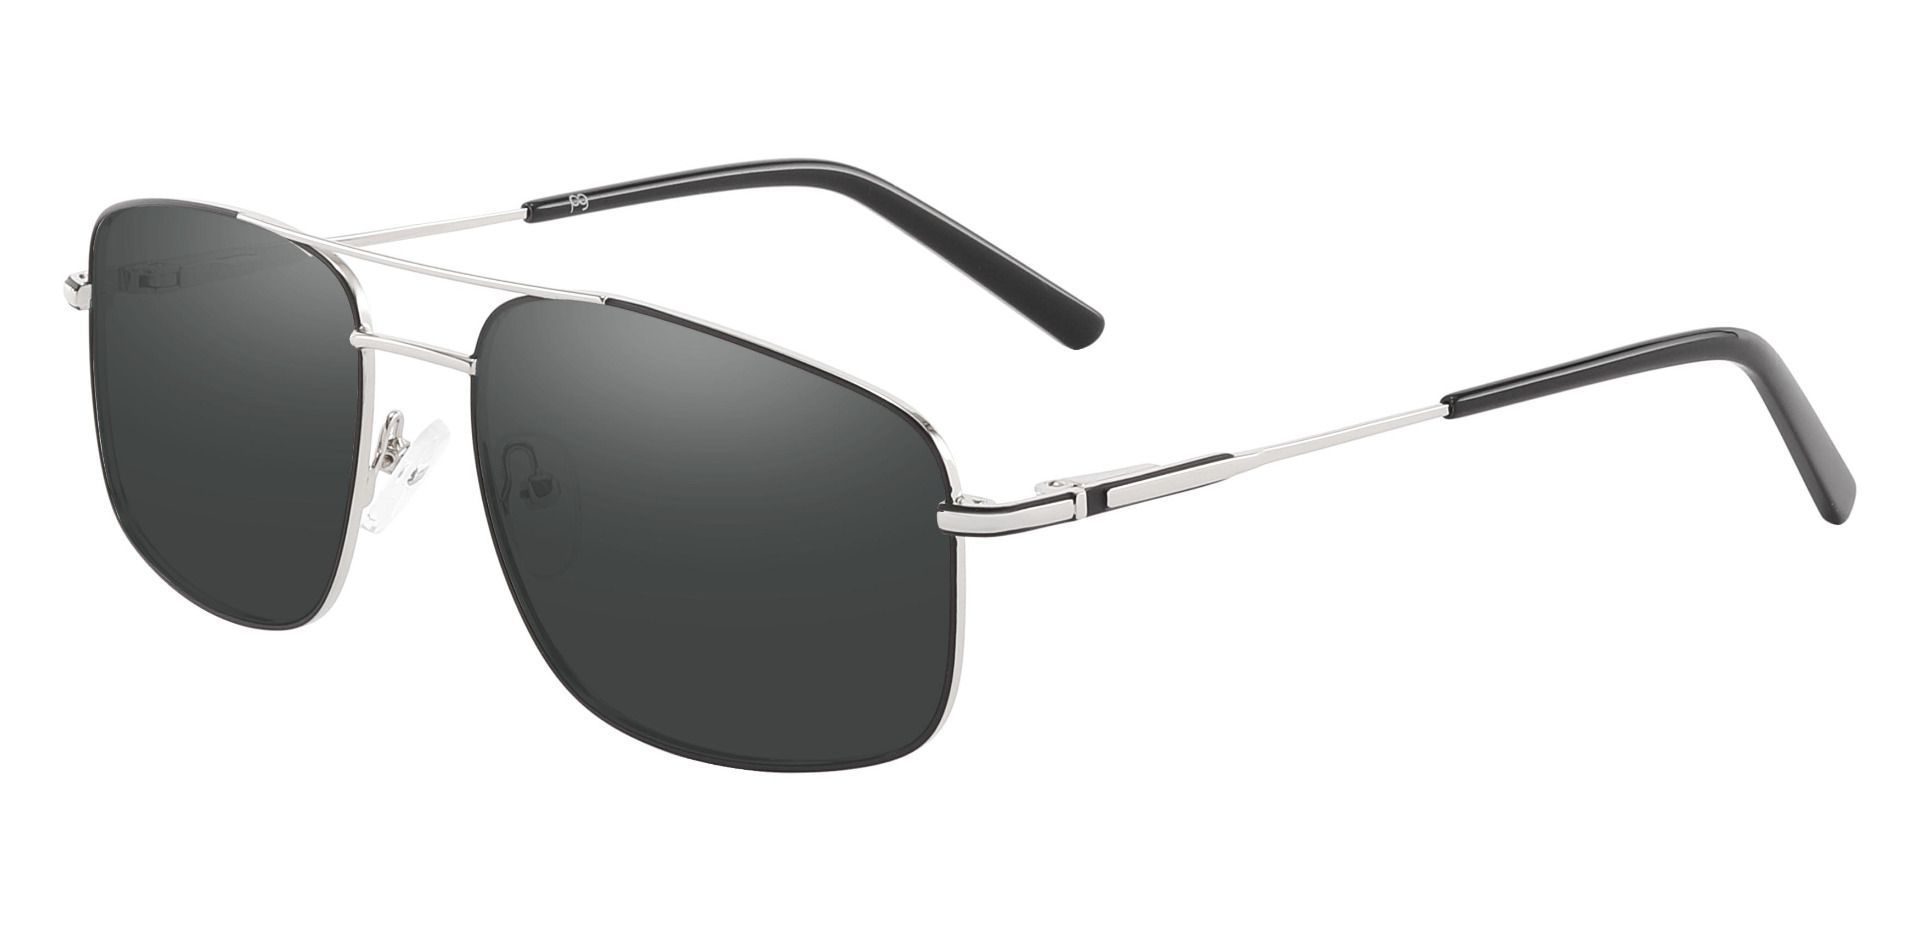 Turner Aviator Lined Bifocal Sunglasses - Silver Frame With Gray Lenses